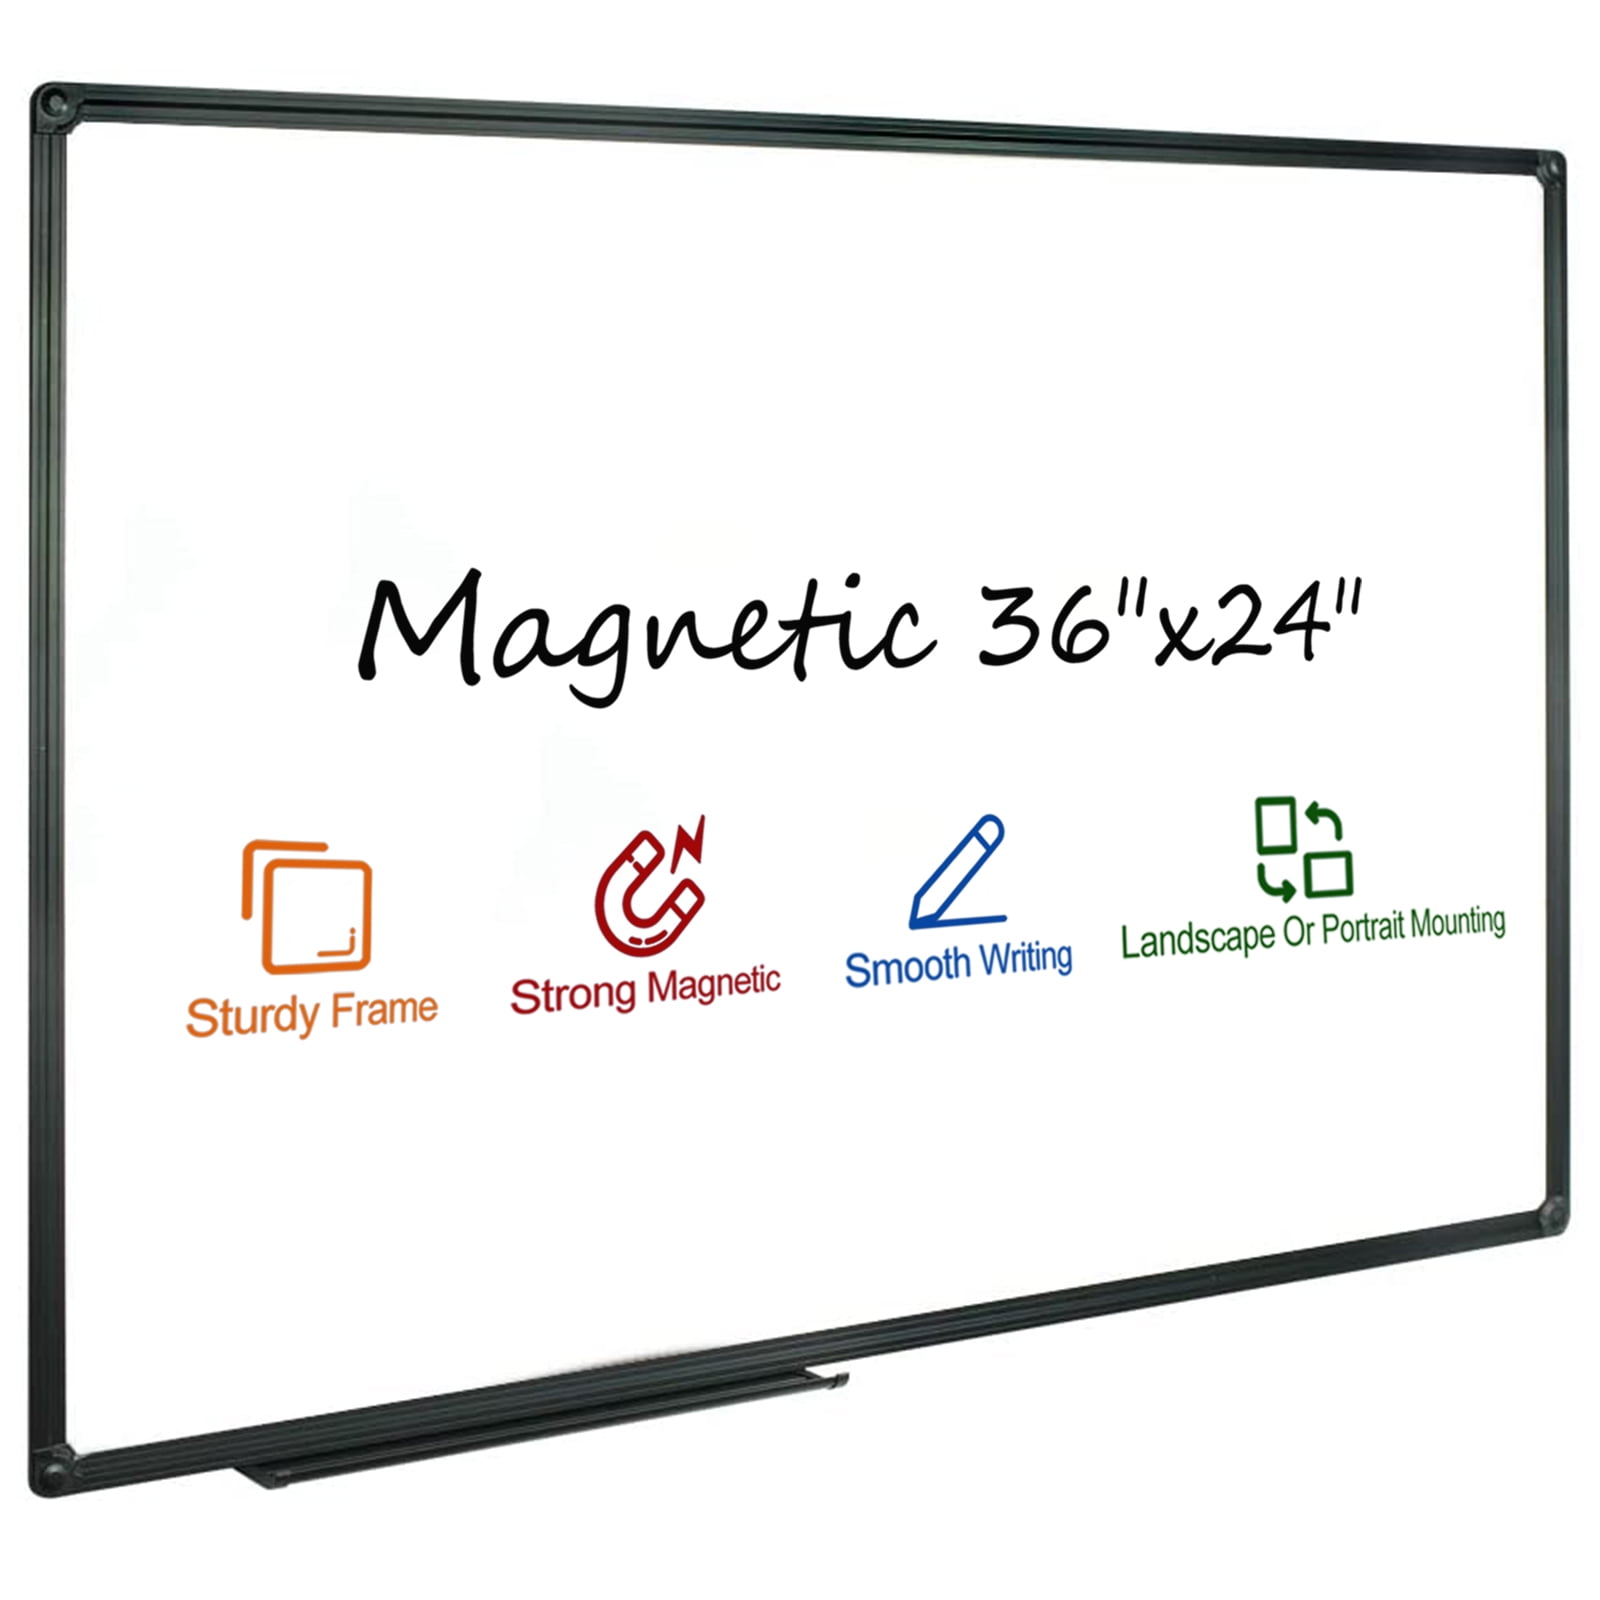 What Can You Do With Magnetic Whiteboard Walls?